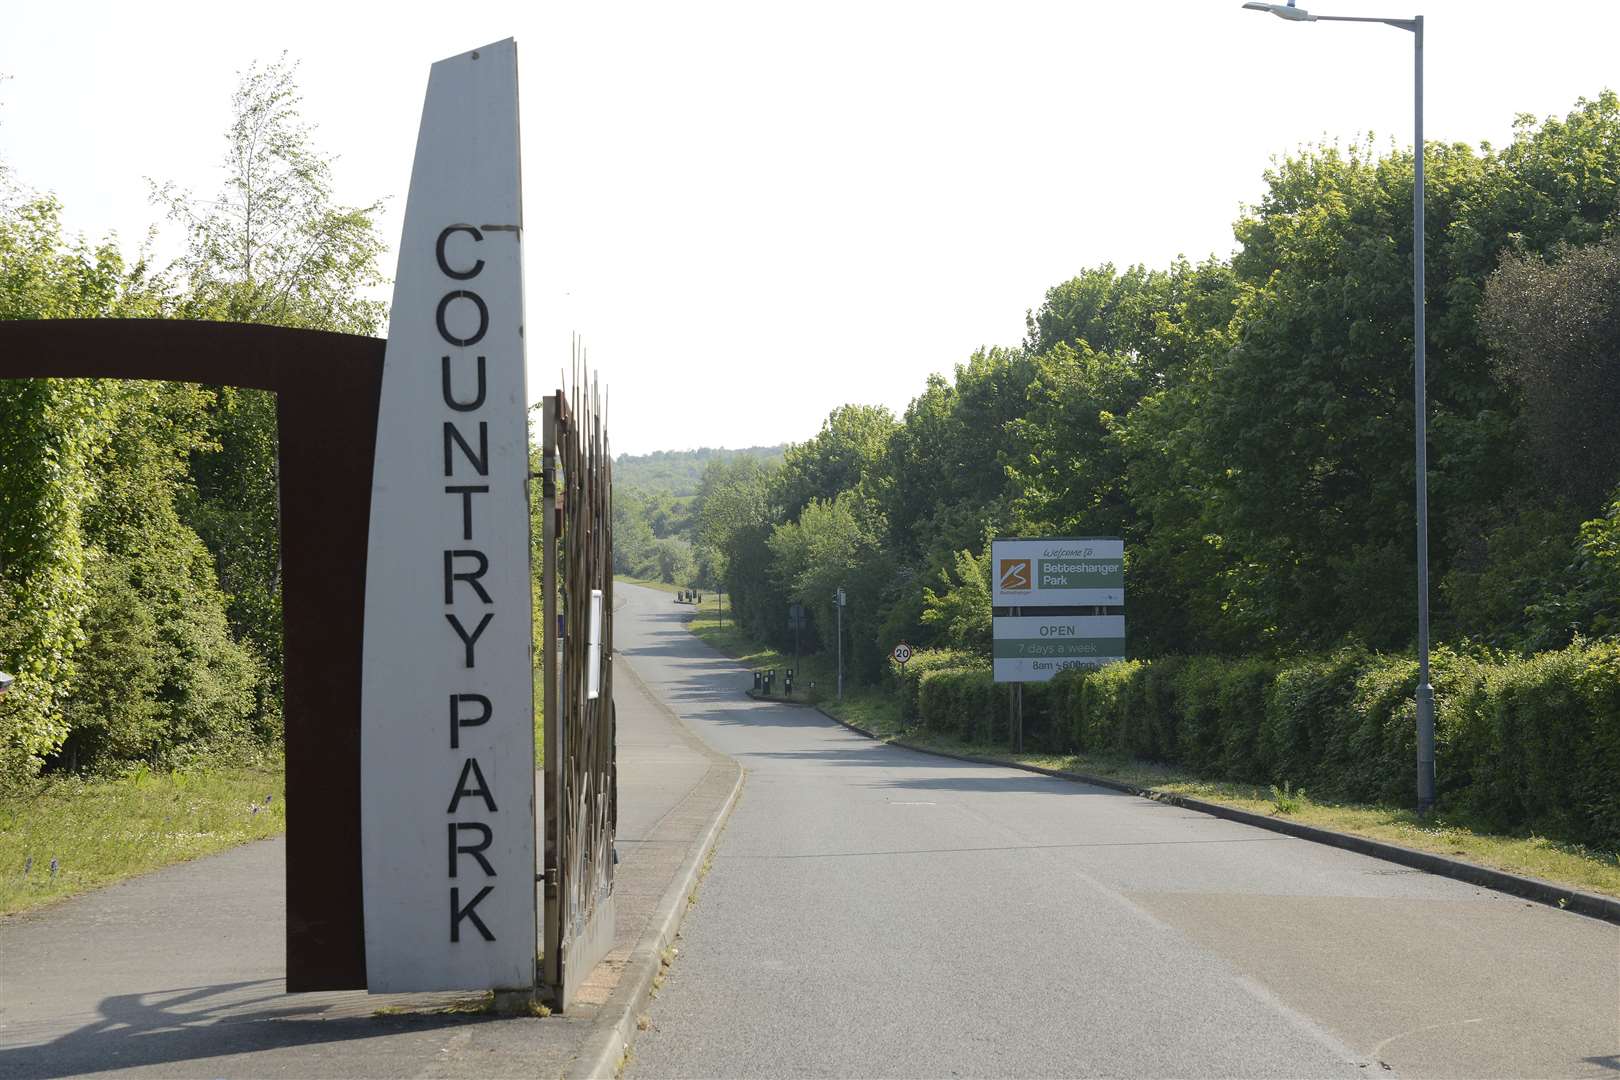 Betteshanger Country Park is open but has closed its play park and bike hire